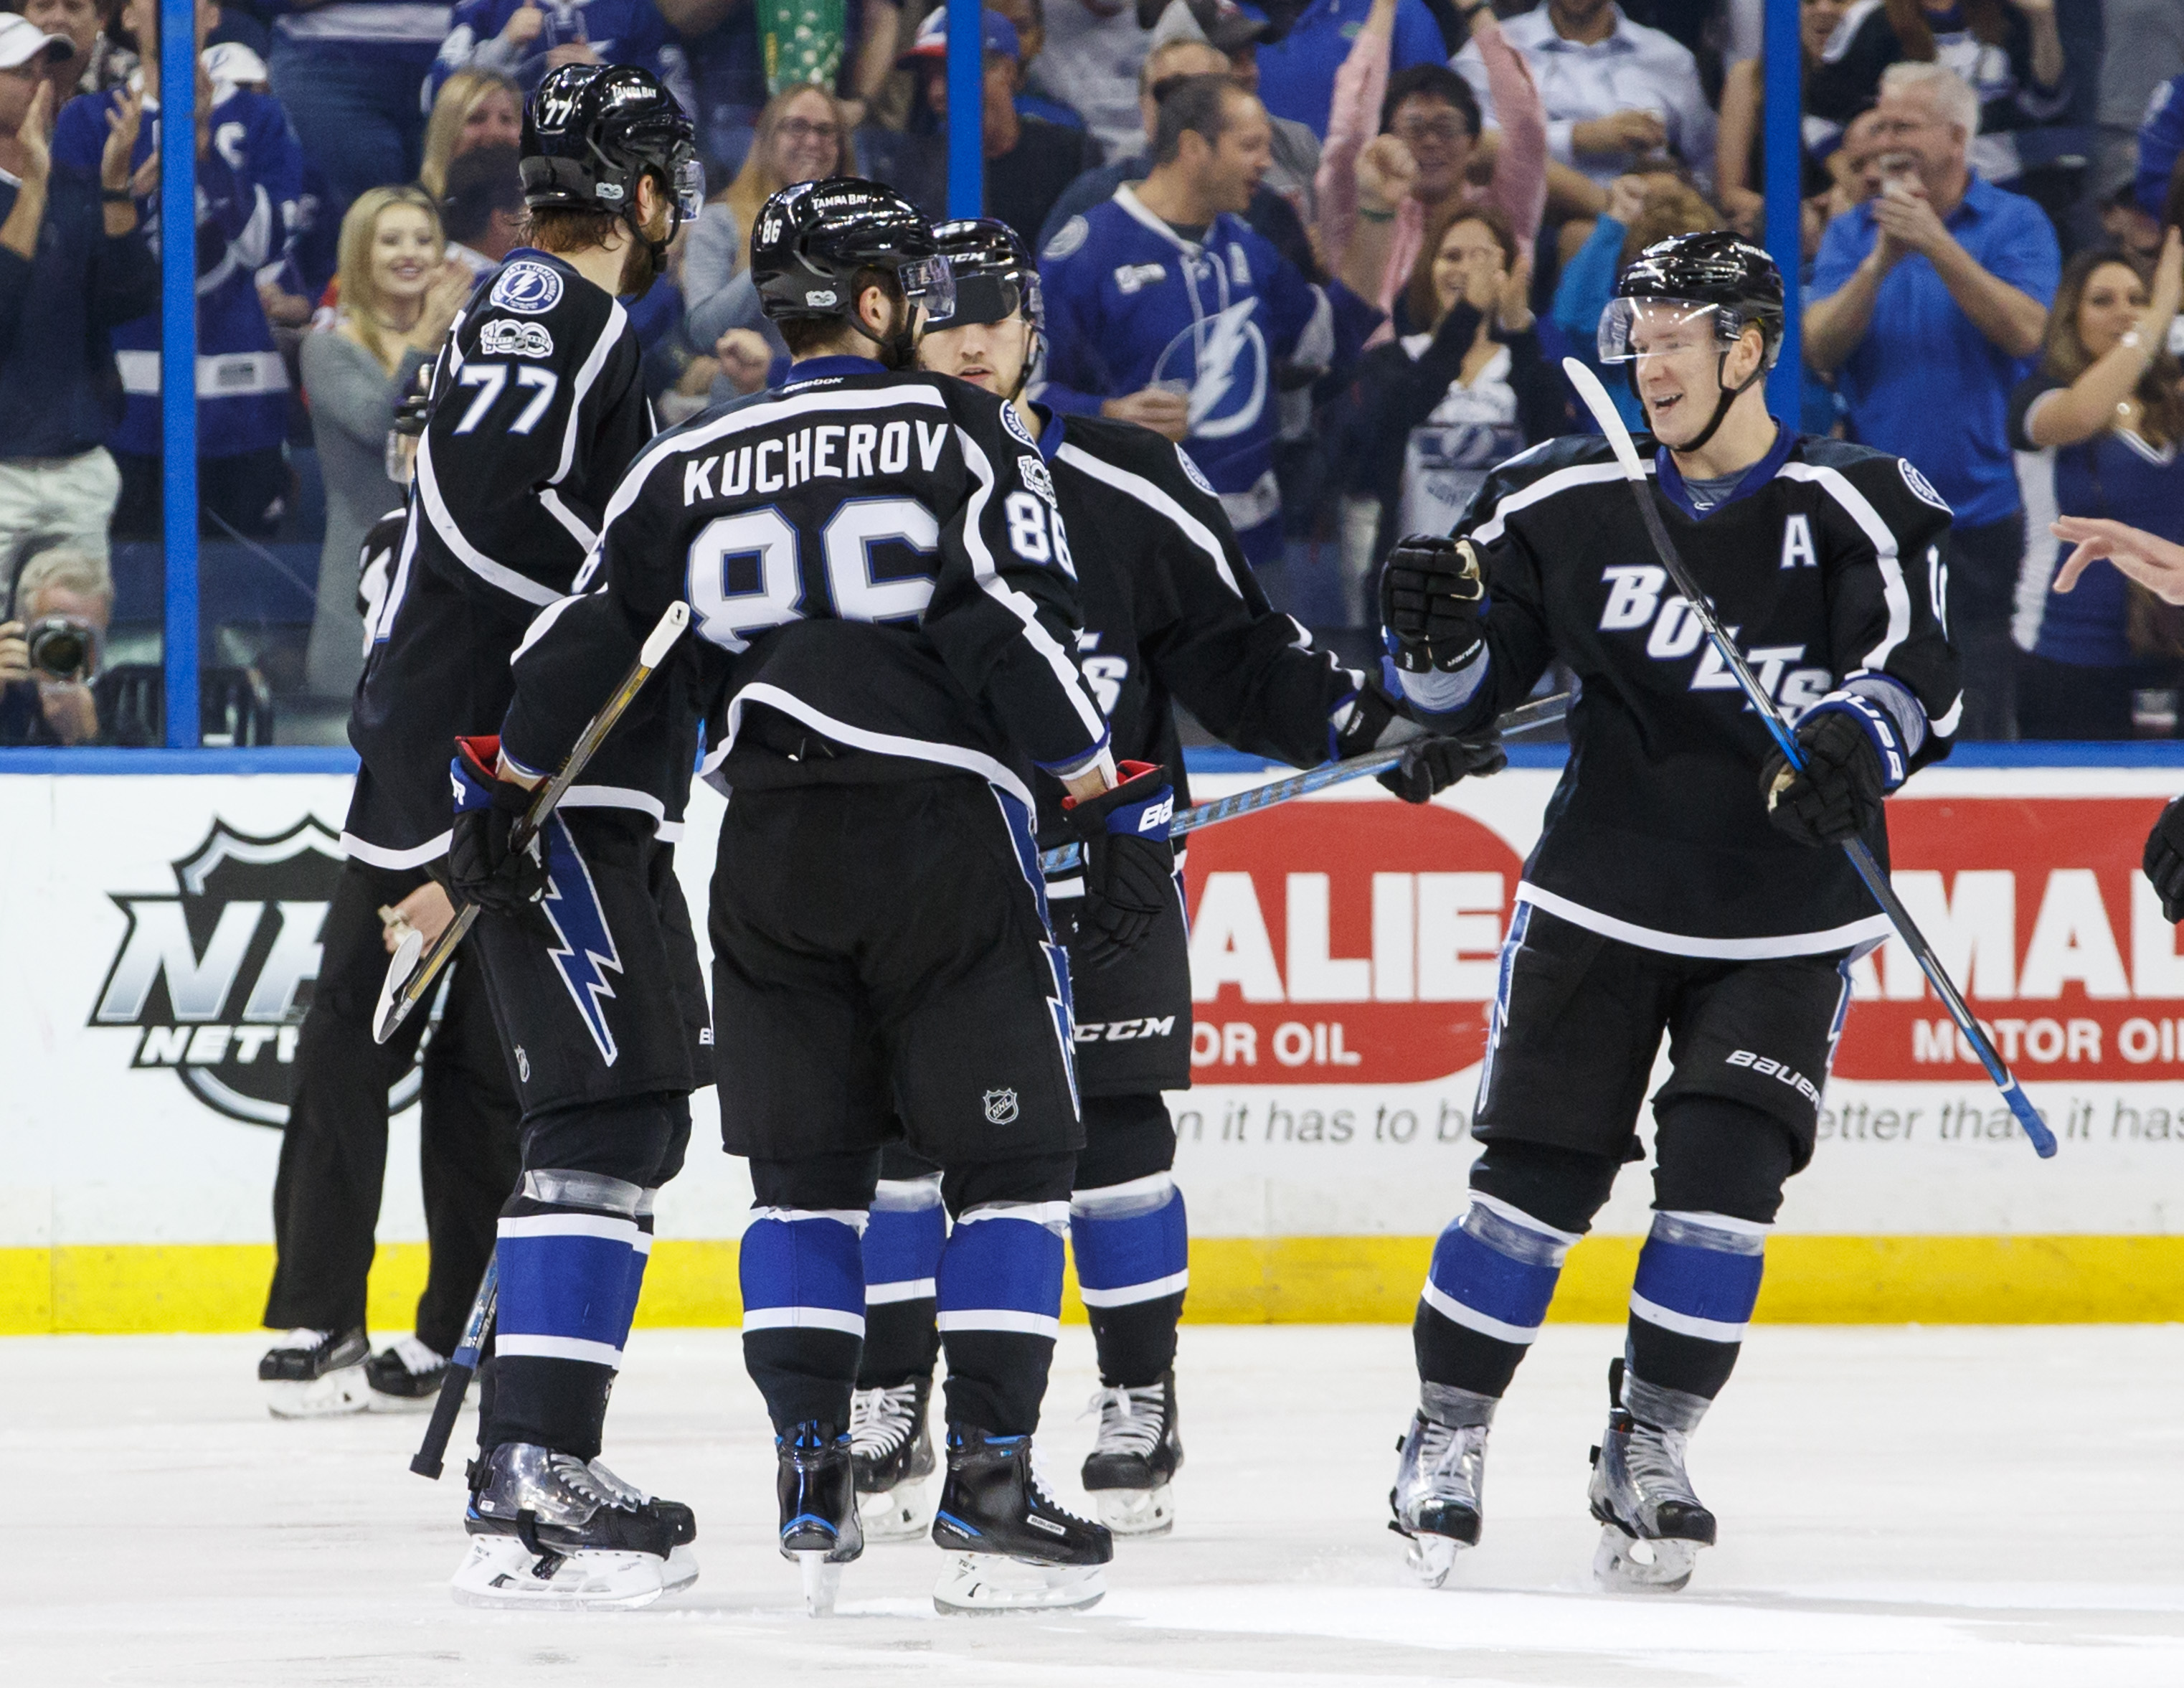 The Lightning Celebrate a Goal by NHL All-Star Defenseman Victor Hedman at AMALIE Arena - Photo Courtesy of Getty Images